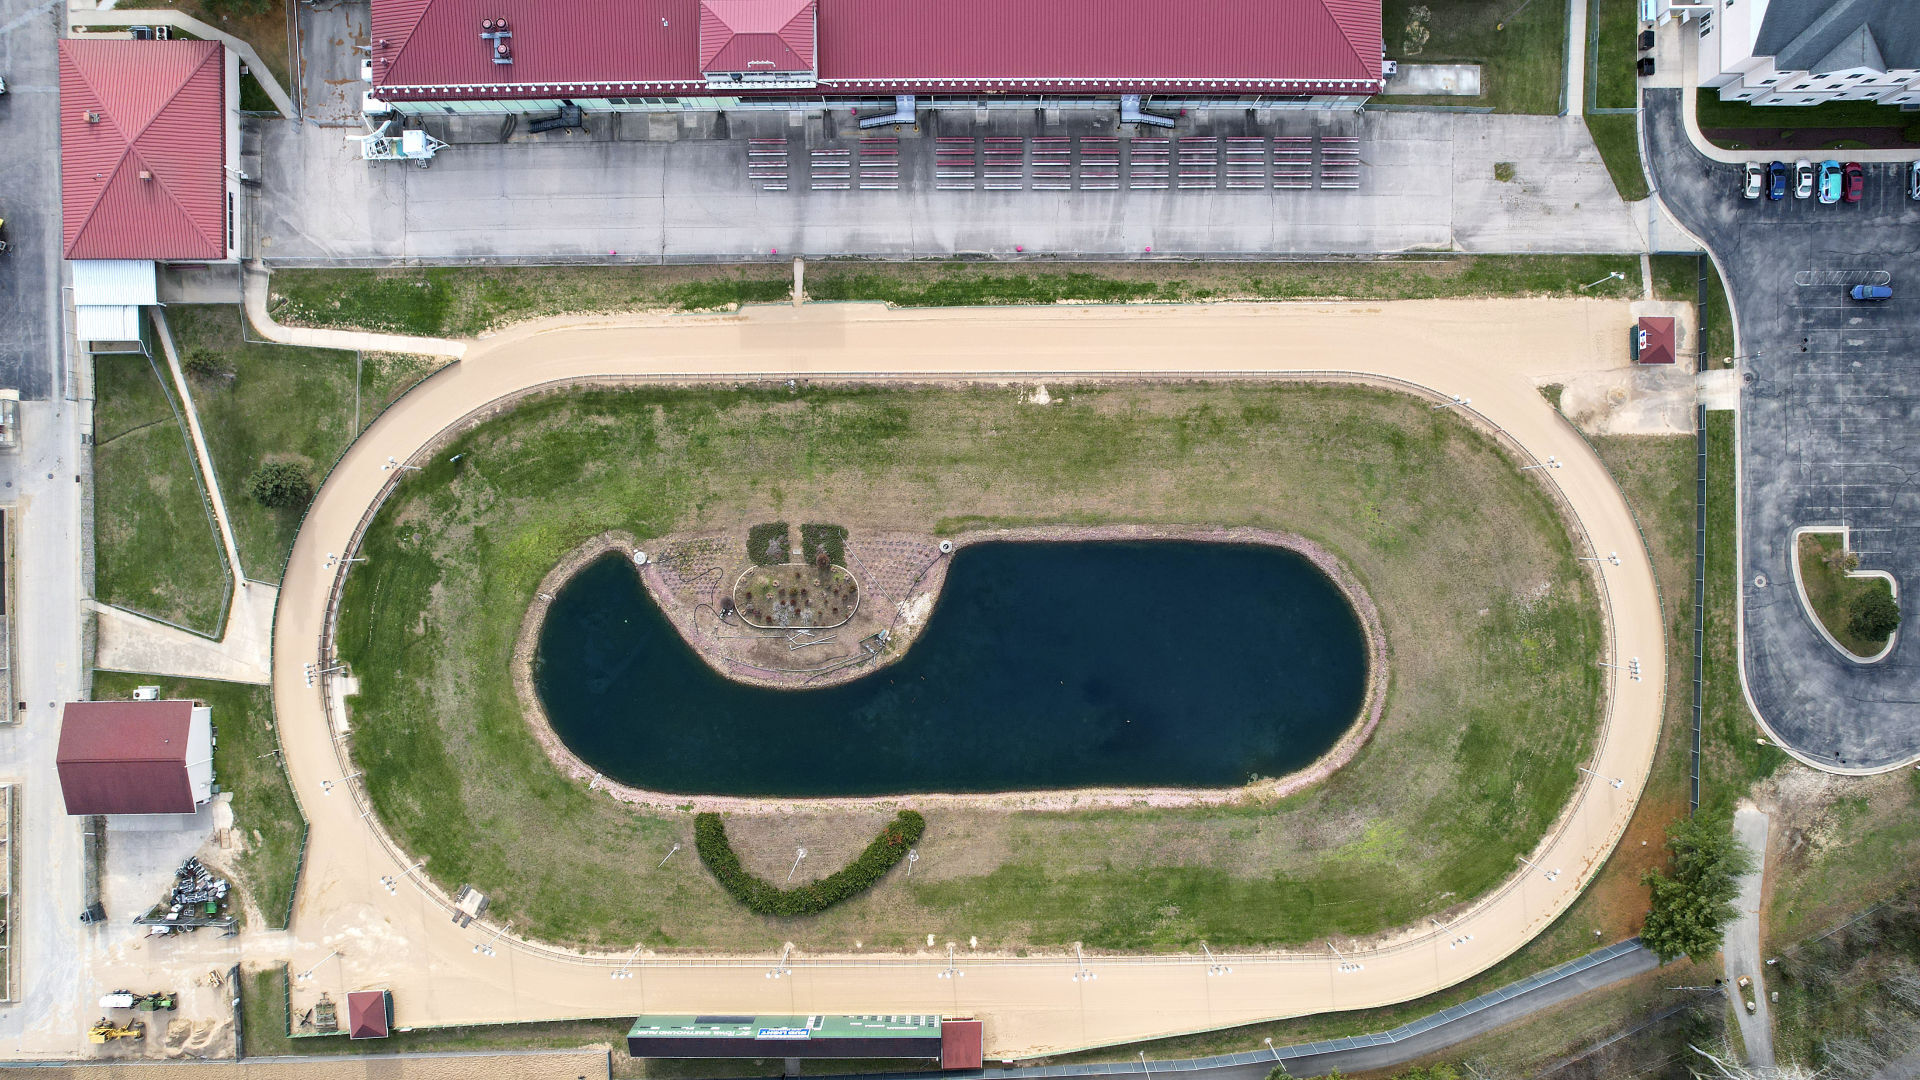 Iowa Greyhound Park as seen from above on Nov. 24, 2021.    PHOTO CREDIT: Dave Kettering